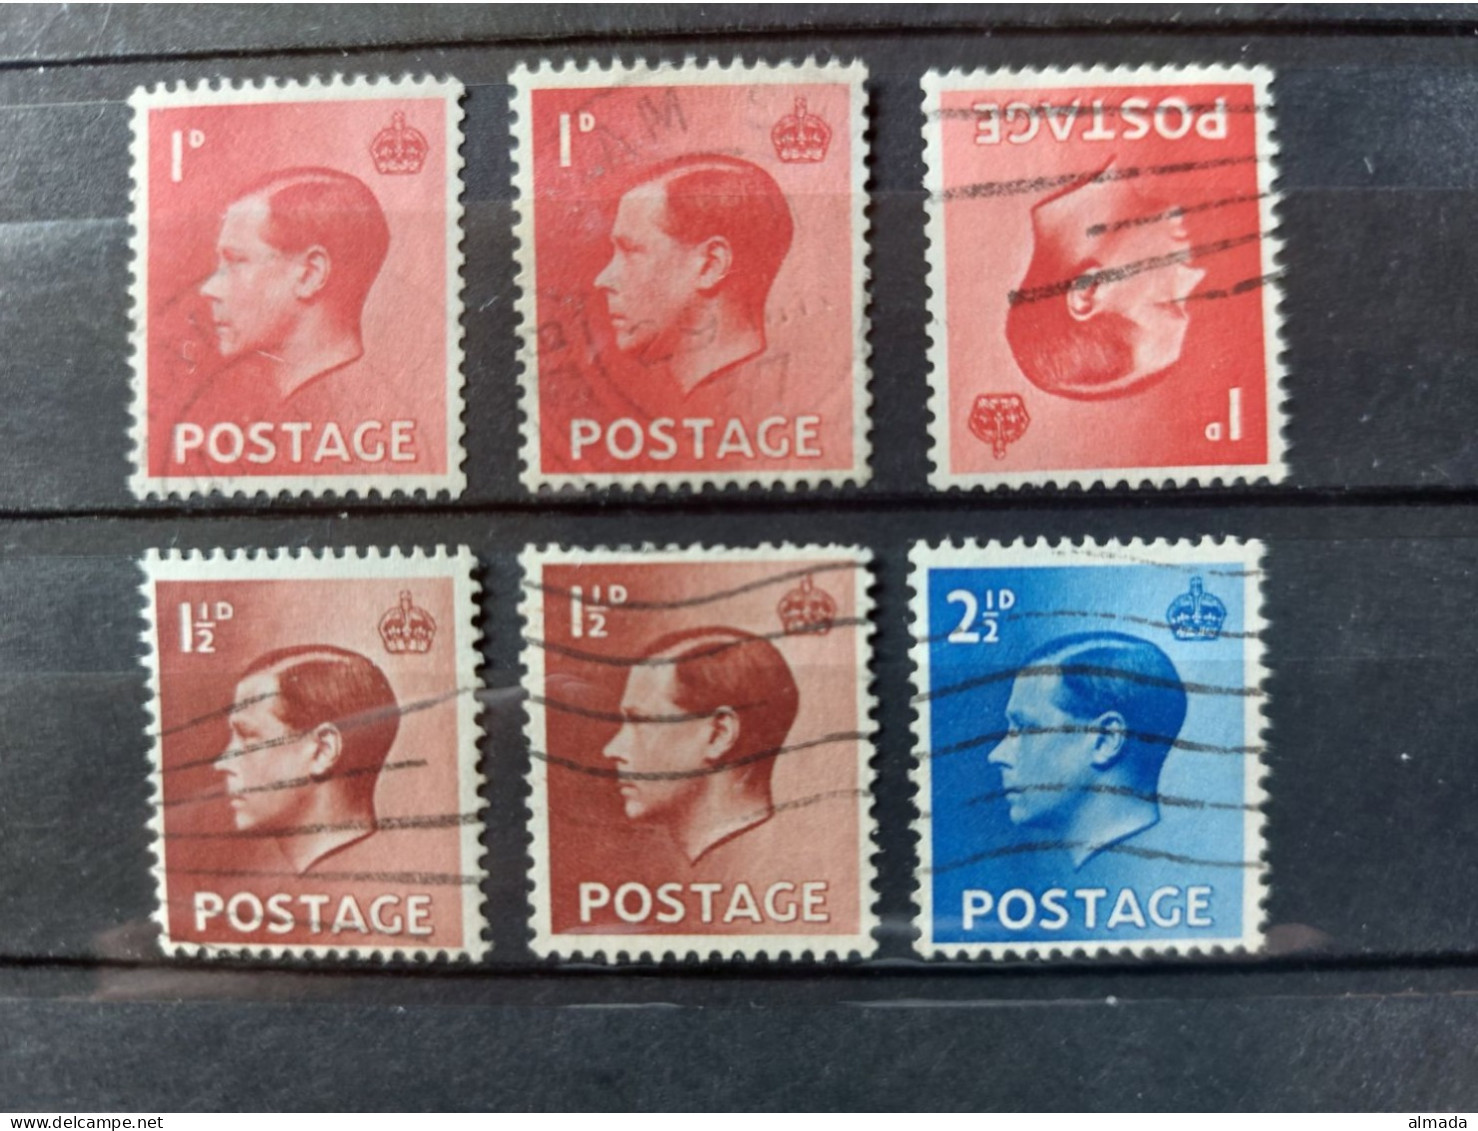 UK 1936: 6 Used Stamps, 1d With 2 Positions Of The Wmk. - Oblitérés